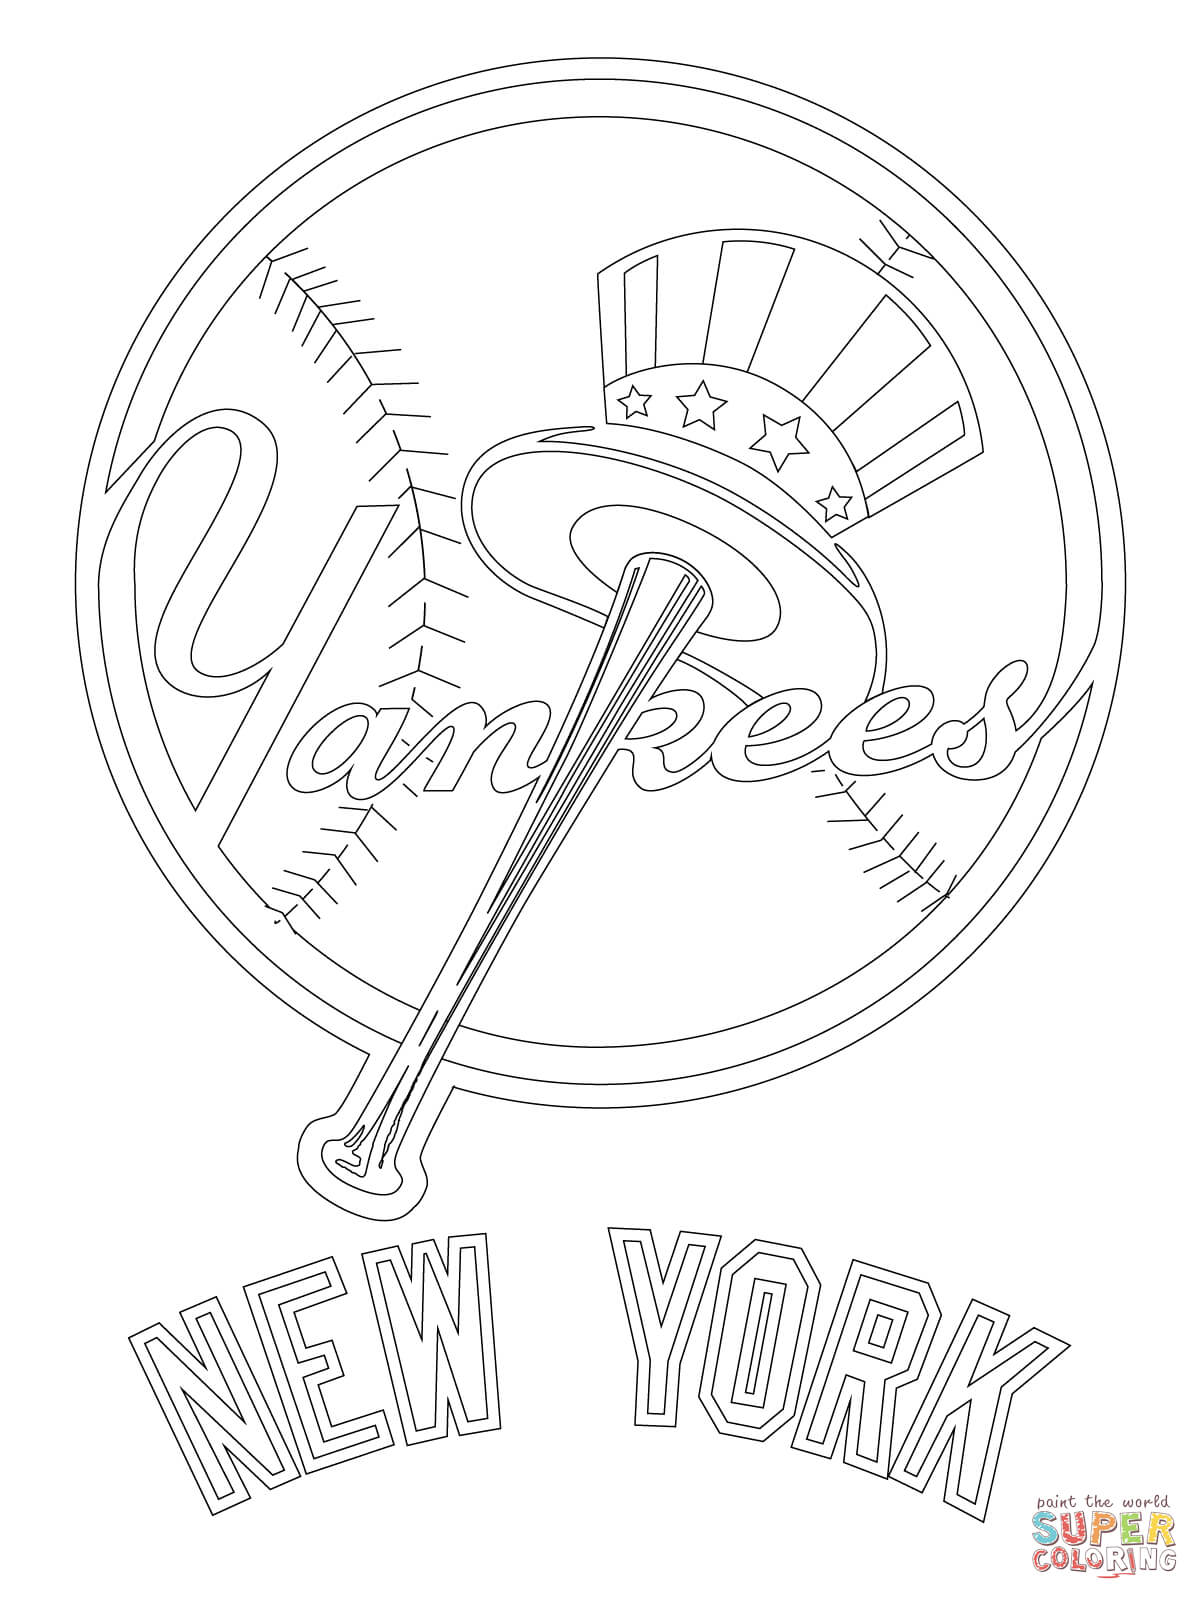 New York Yankees Coloring Page